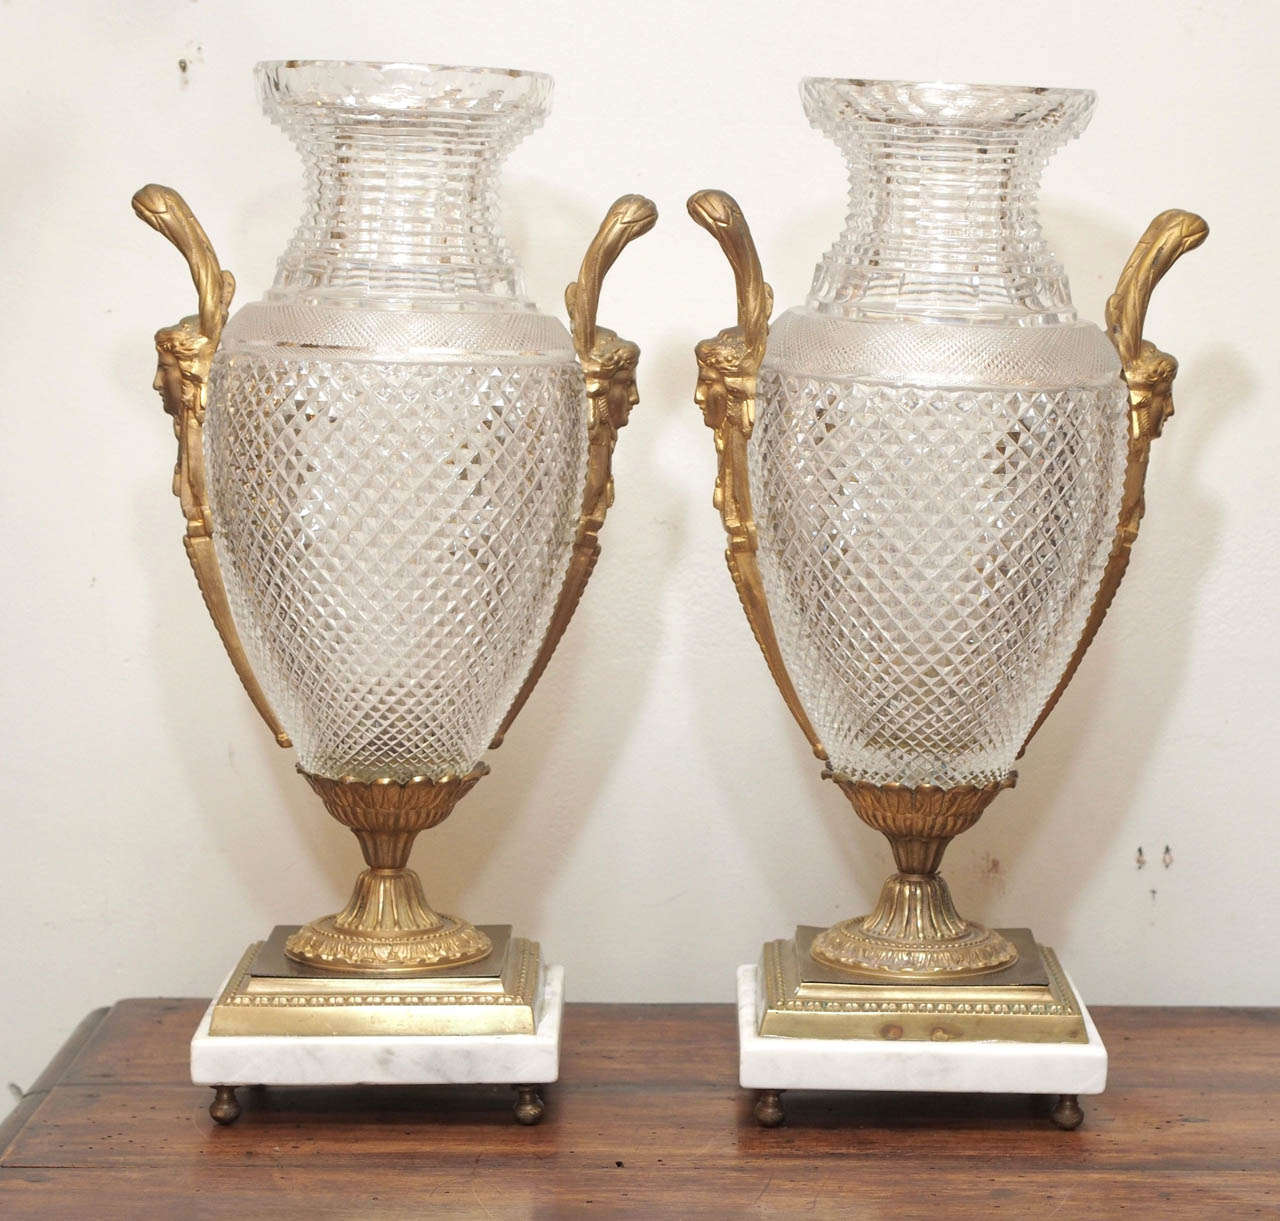 Pair of Cut Crystal Bacarrat Vases with gilt bronze mounts 19th c. later carrera marble bases on bronze ball feet. 
These have been mounted as lamps in the past and then unwired for vases. 
The bronze bases have been drilled (see photo) 
These